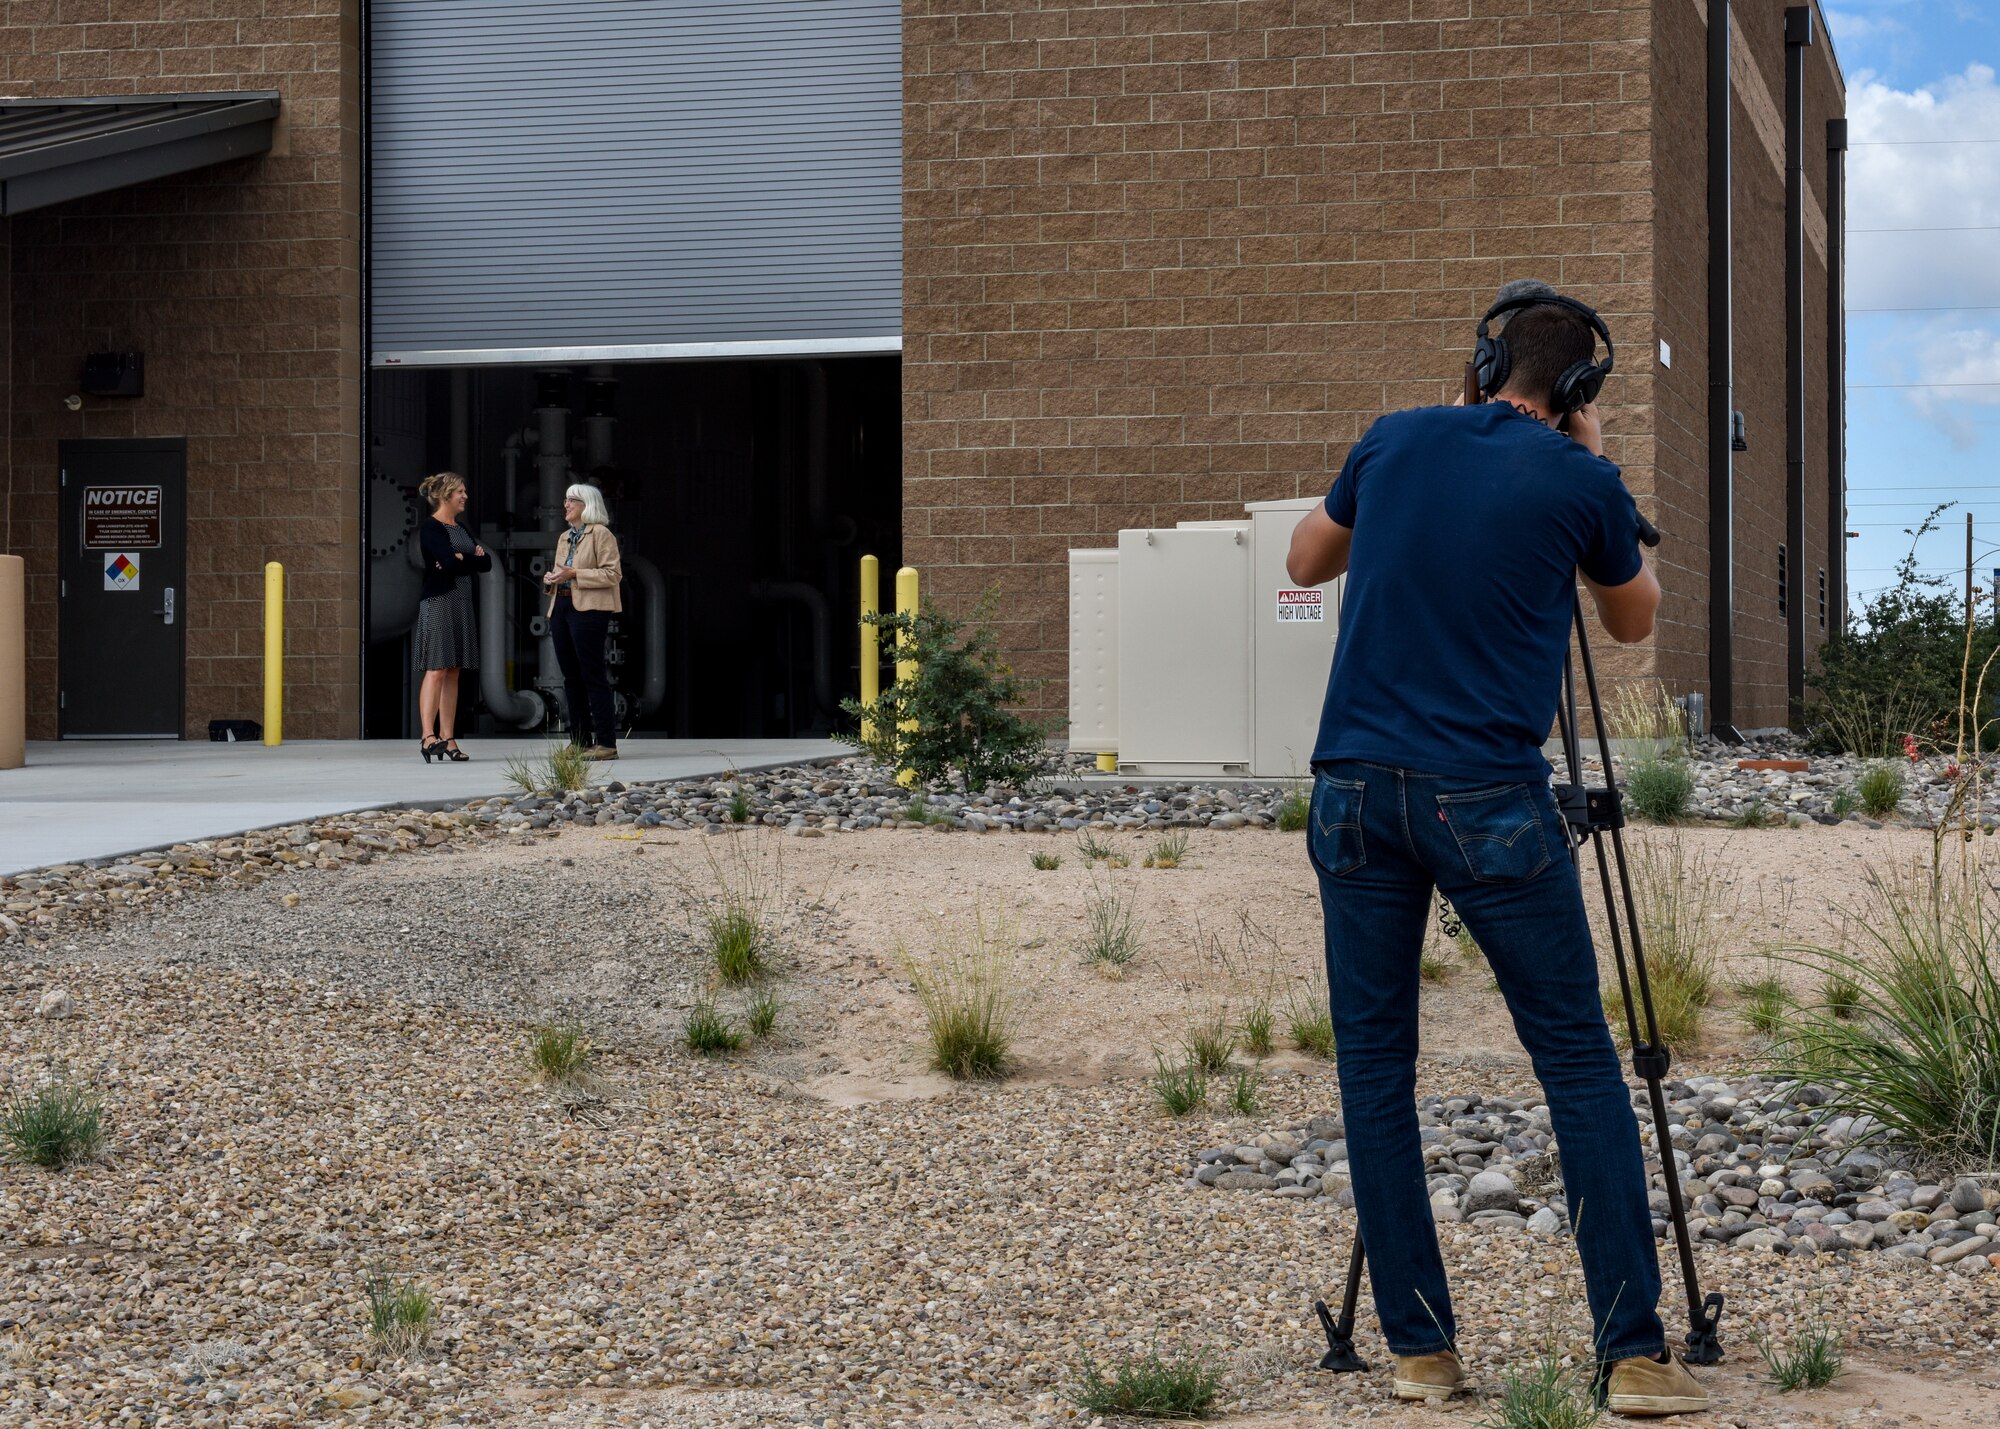 Antony Lostetter (right), New Mexico Public Broadcasting Service production manager, films an interview at Kirtland Air Force Base, N.M., Sept. 16, 2019. PBS filmed a news story at Kirtland’s groundwater treatment facility concerning what has been done to clean up the fuel spill. (U.S. Air Force photo by Airman 1st Class Austin J. Prisbrey)